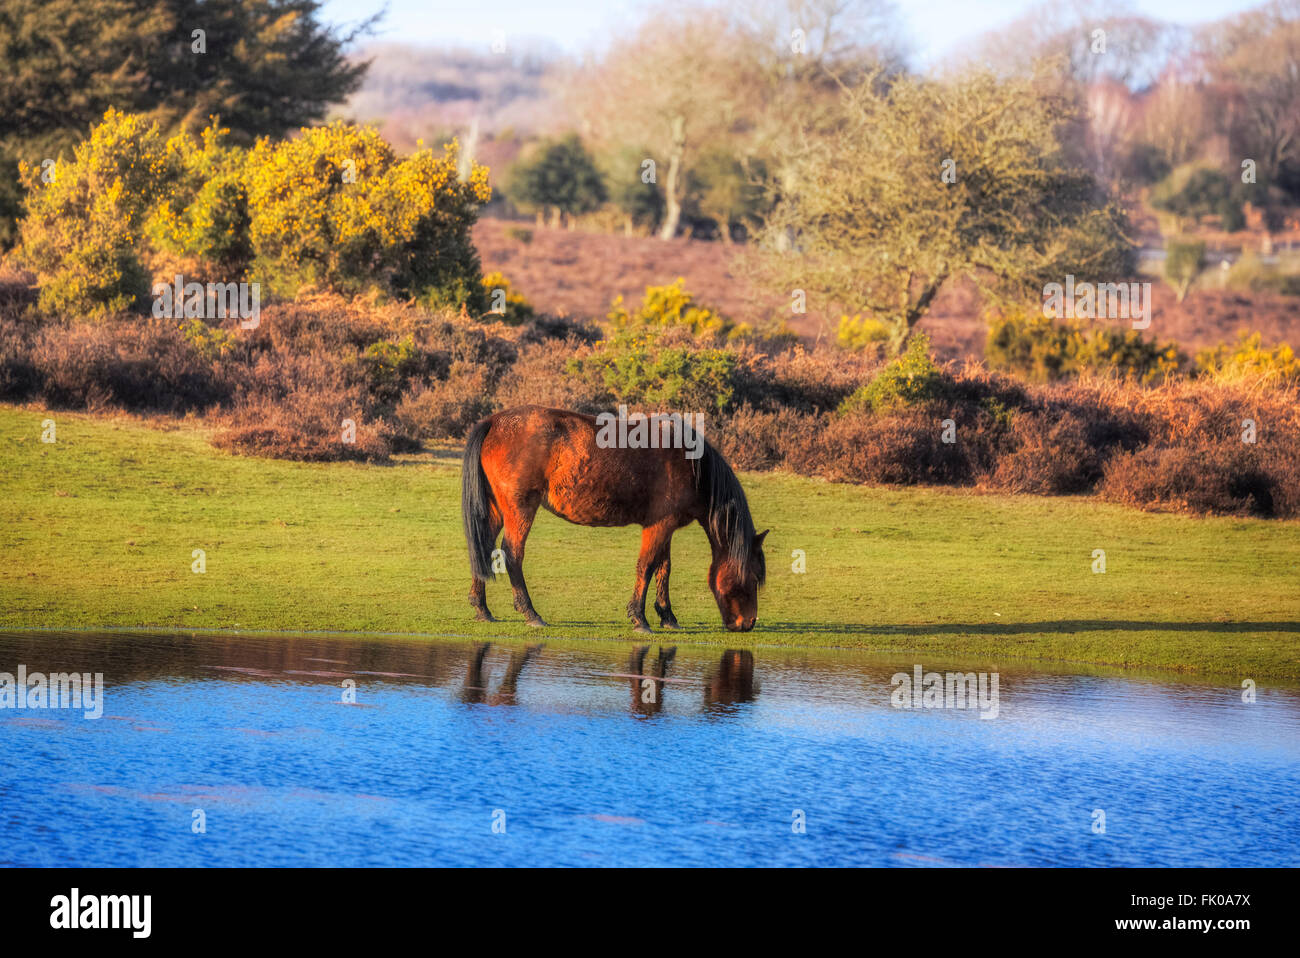 a wild New Forest pony drinking out of a pond near Lyndhurst, Hampshire, England, UK Stock Photo